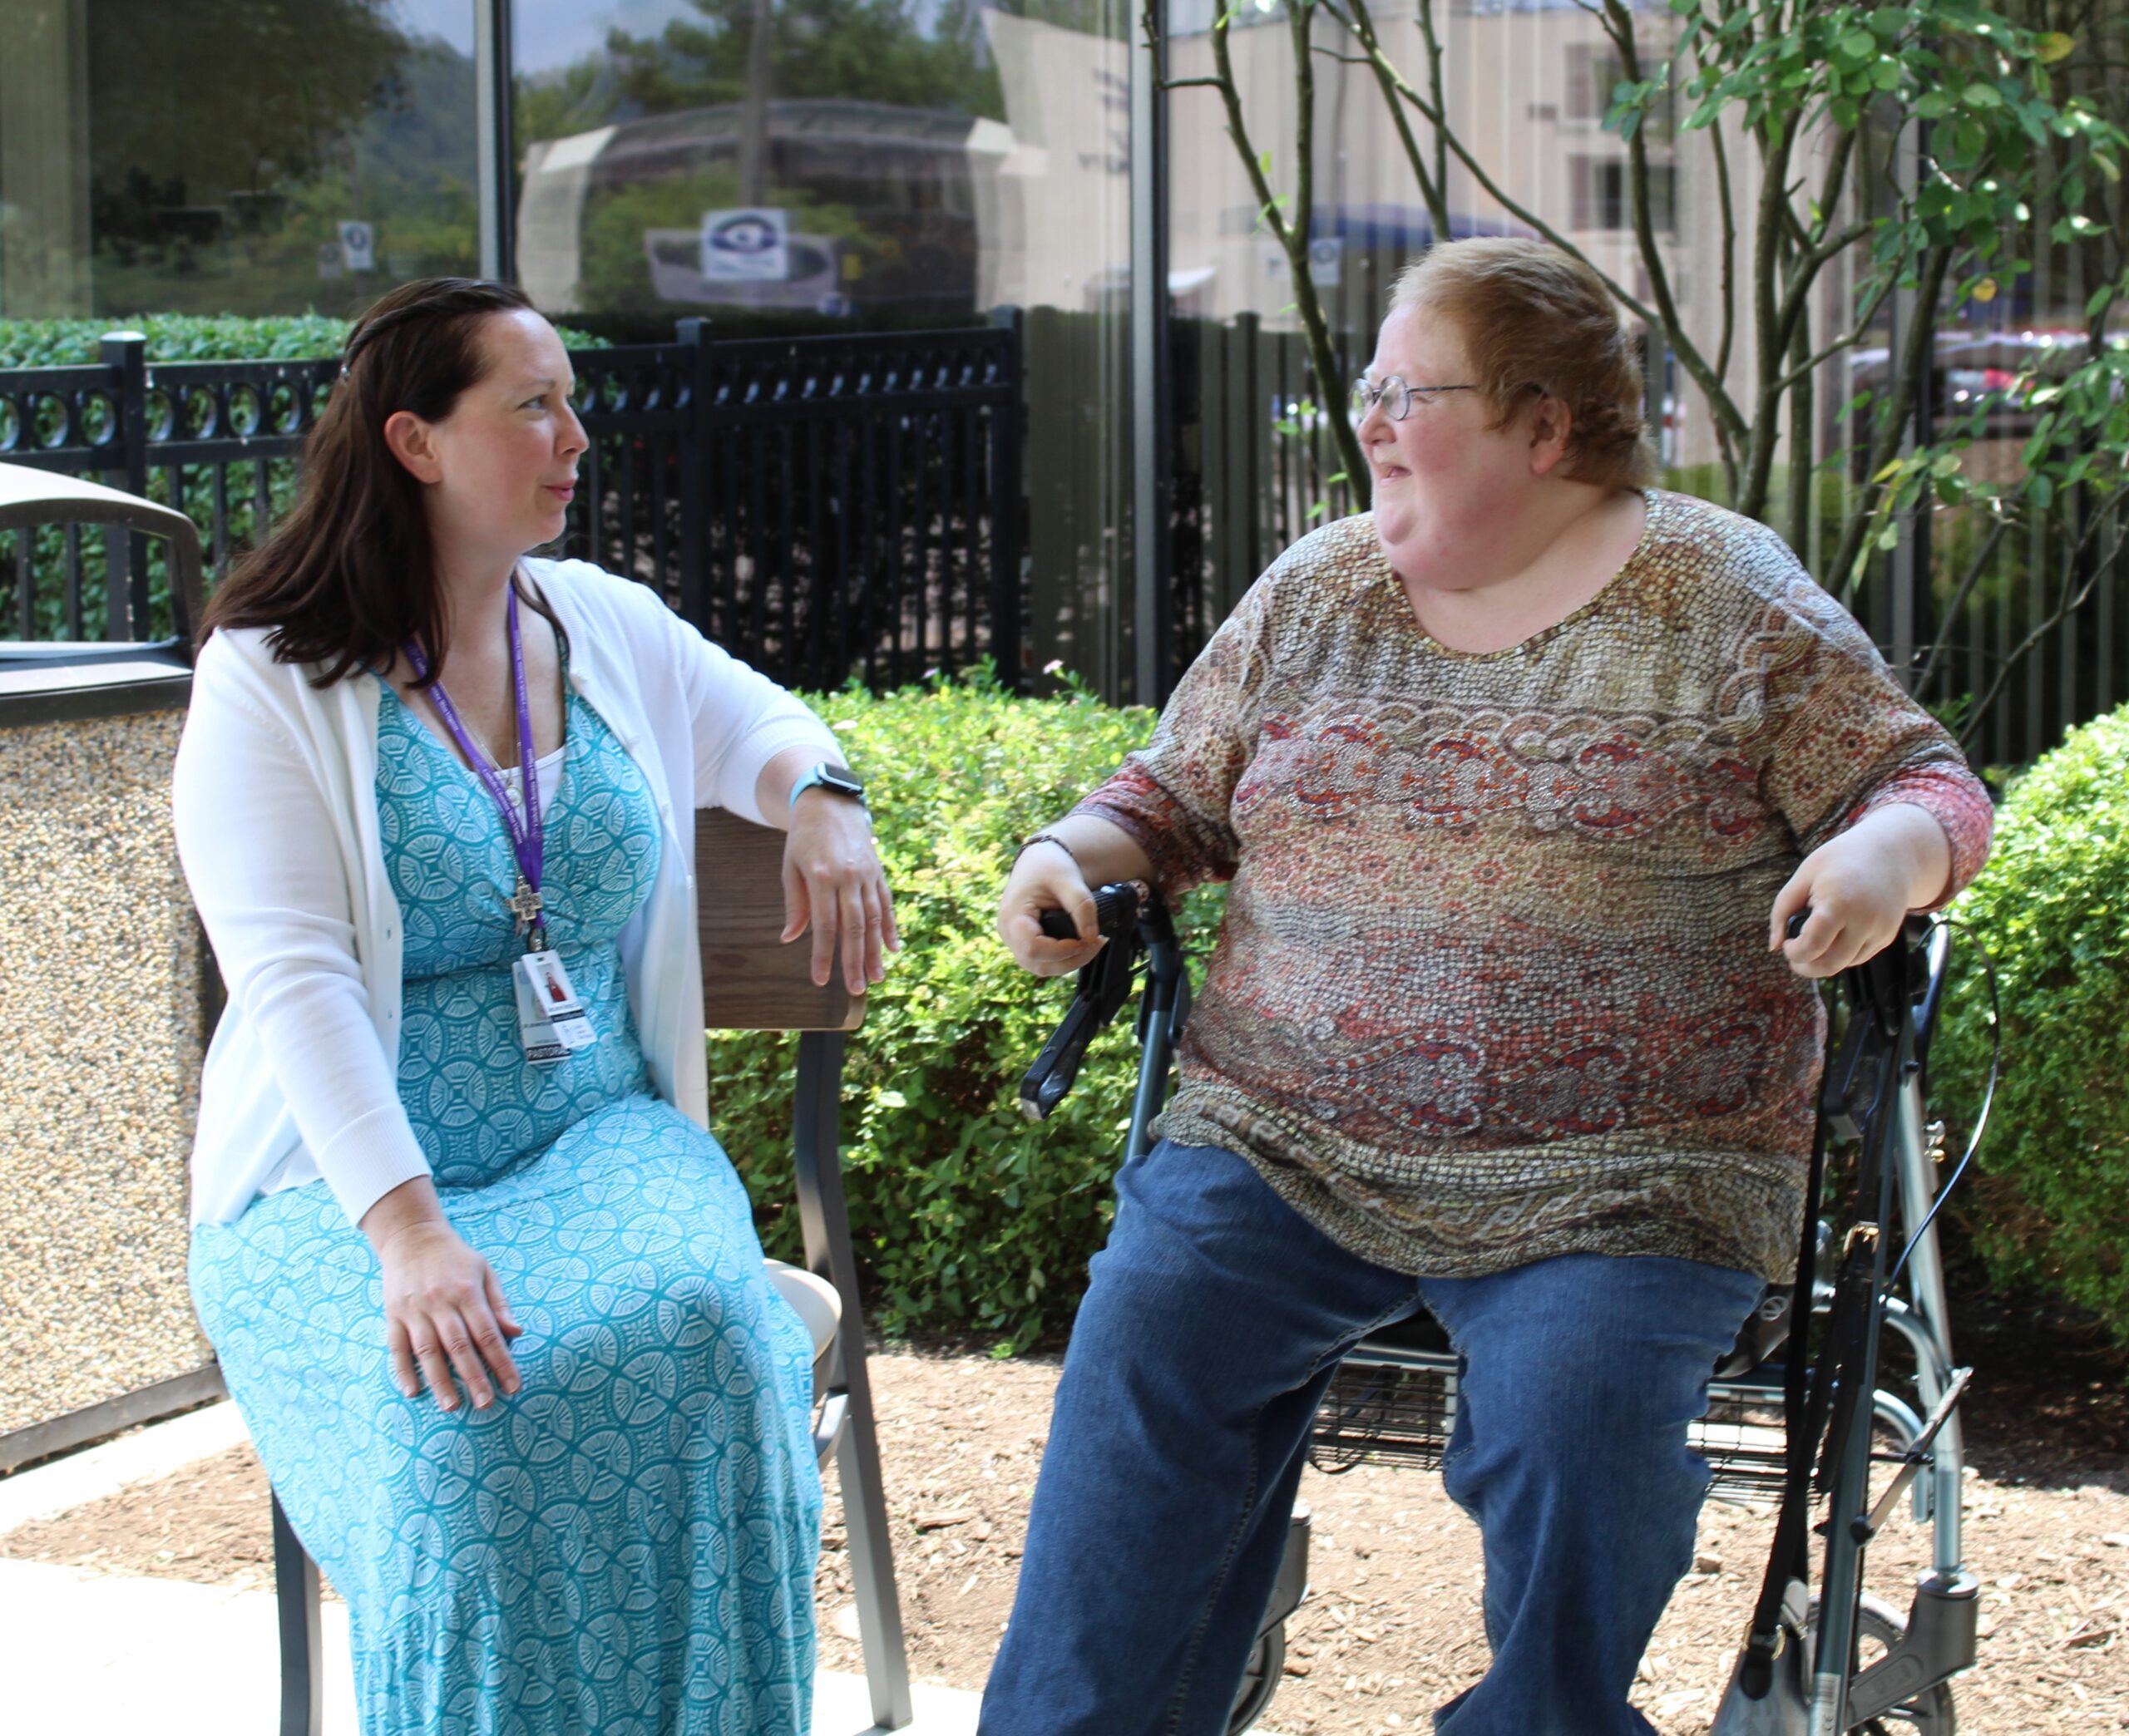 CCWVa Hospital Transition Program Case Manager talks with client